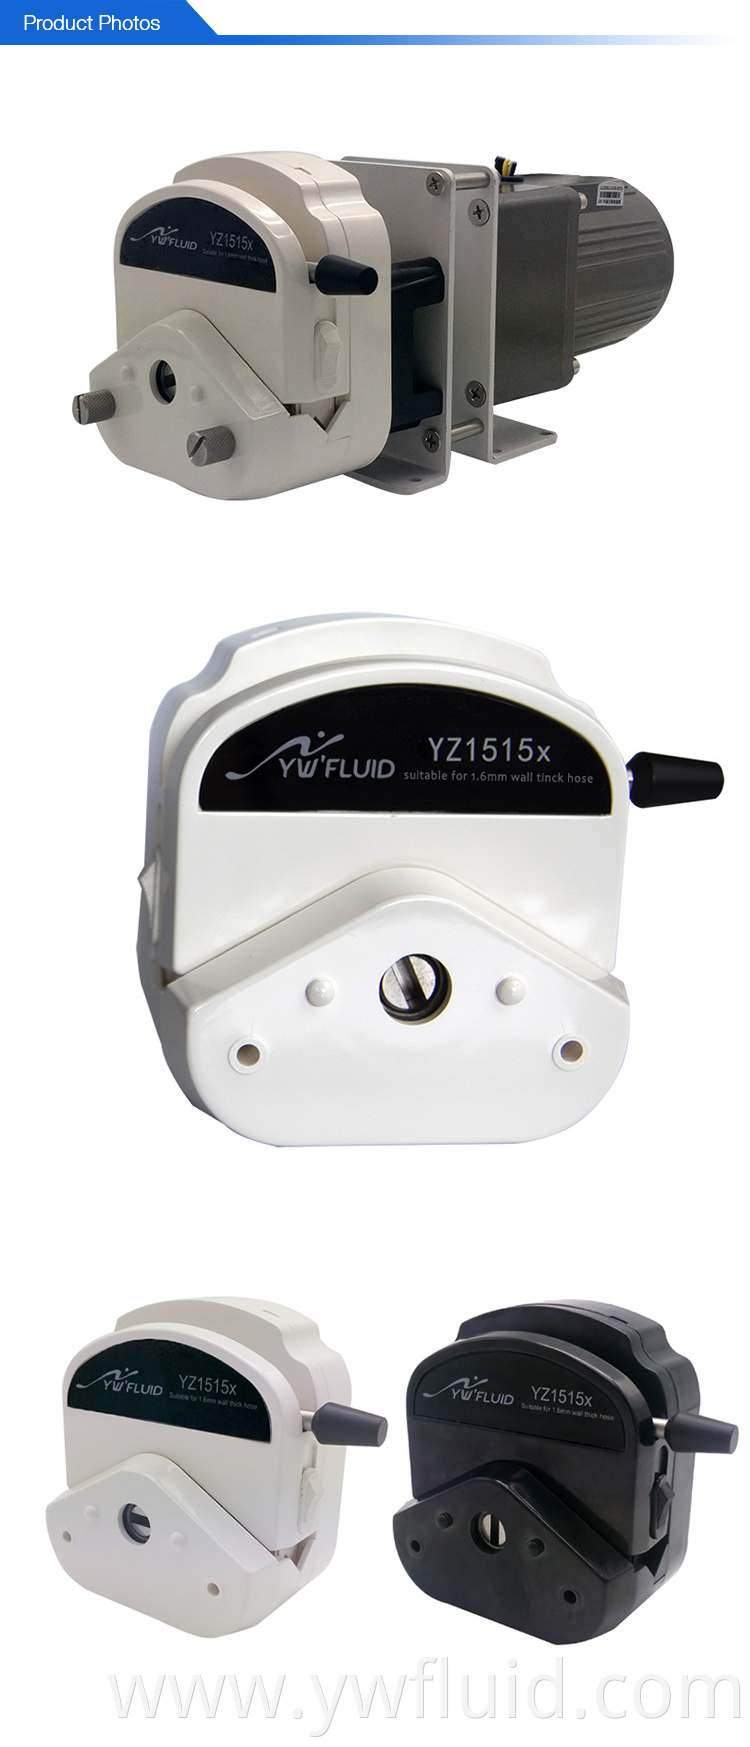 YWfluid easy load Large flow rate Peristaltic pump used for Environmental device